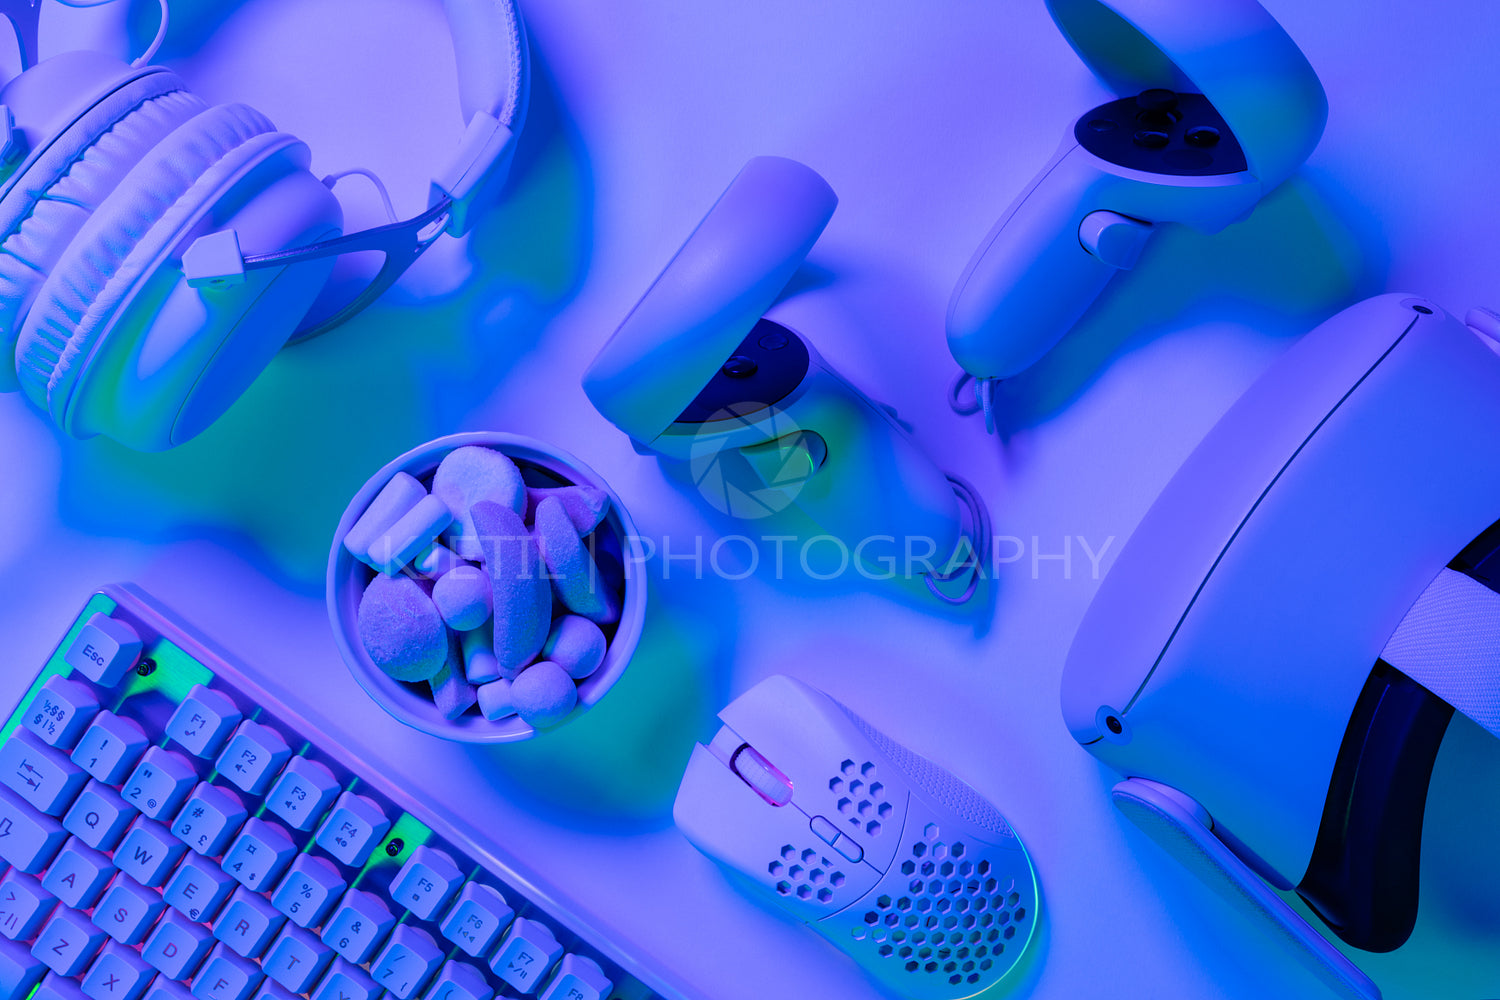 Keyboard with marshmallows and accessories on desk